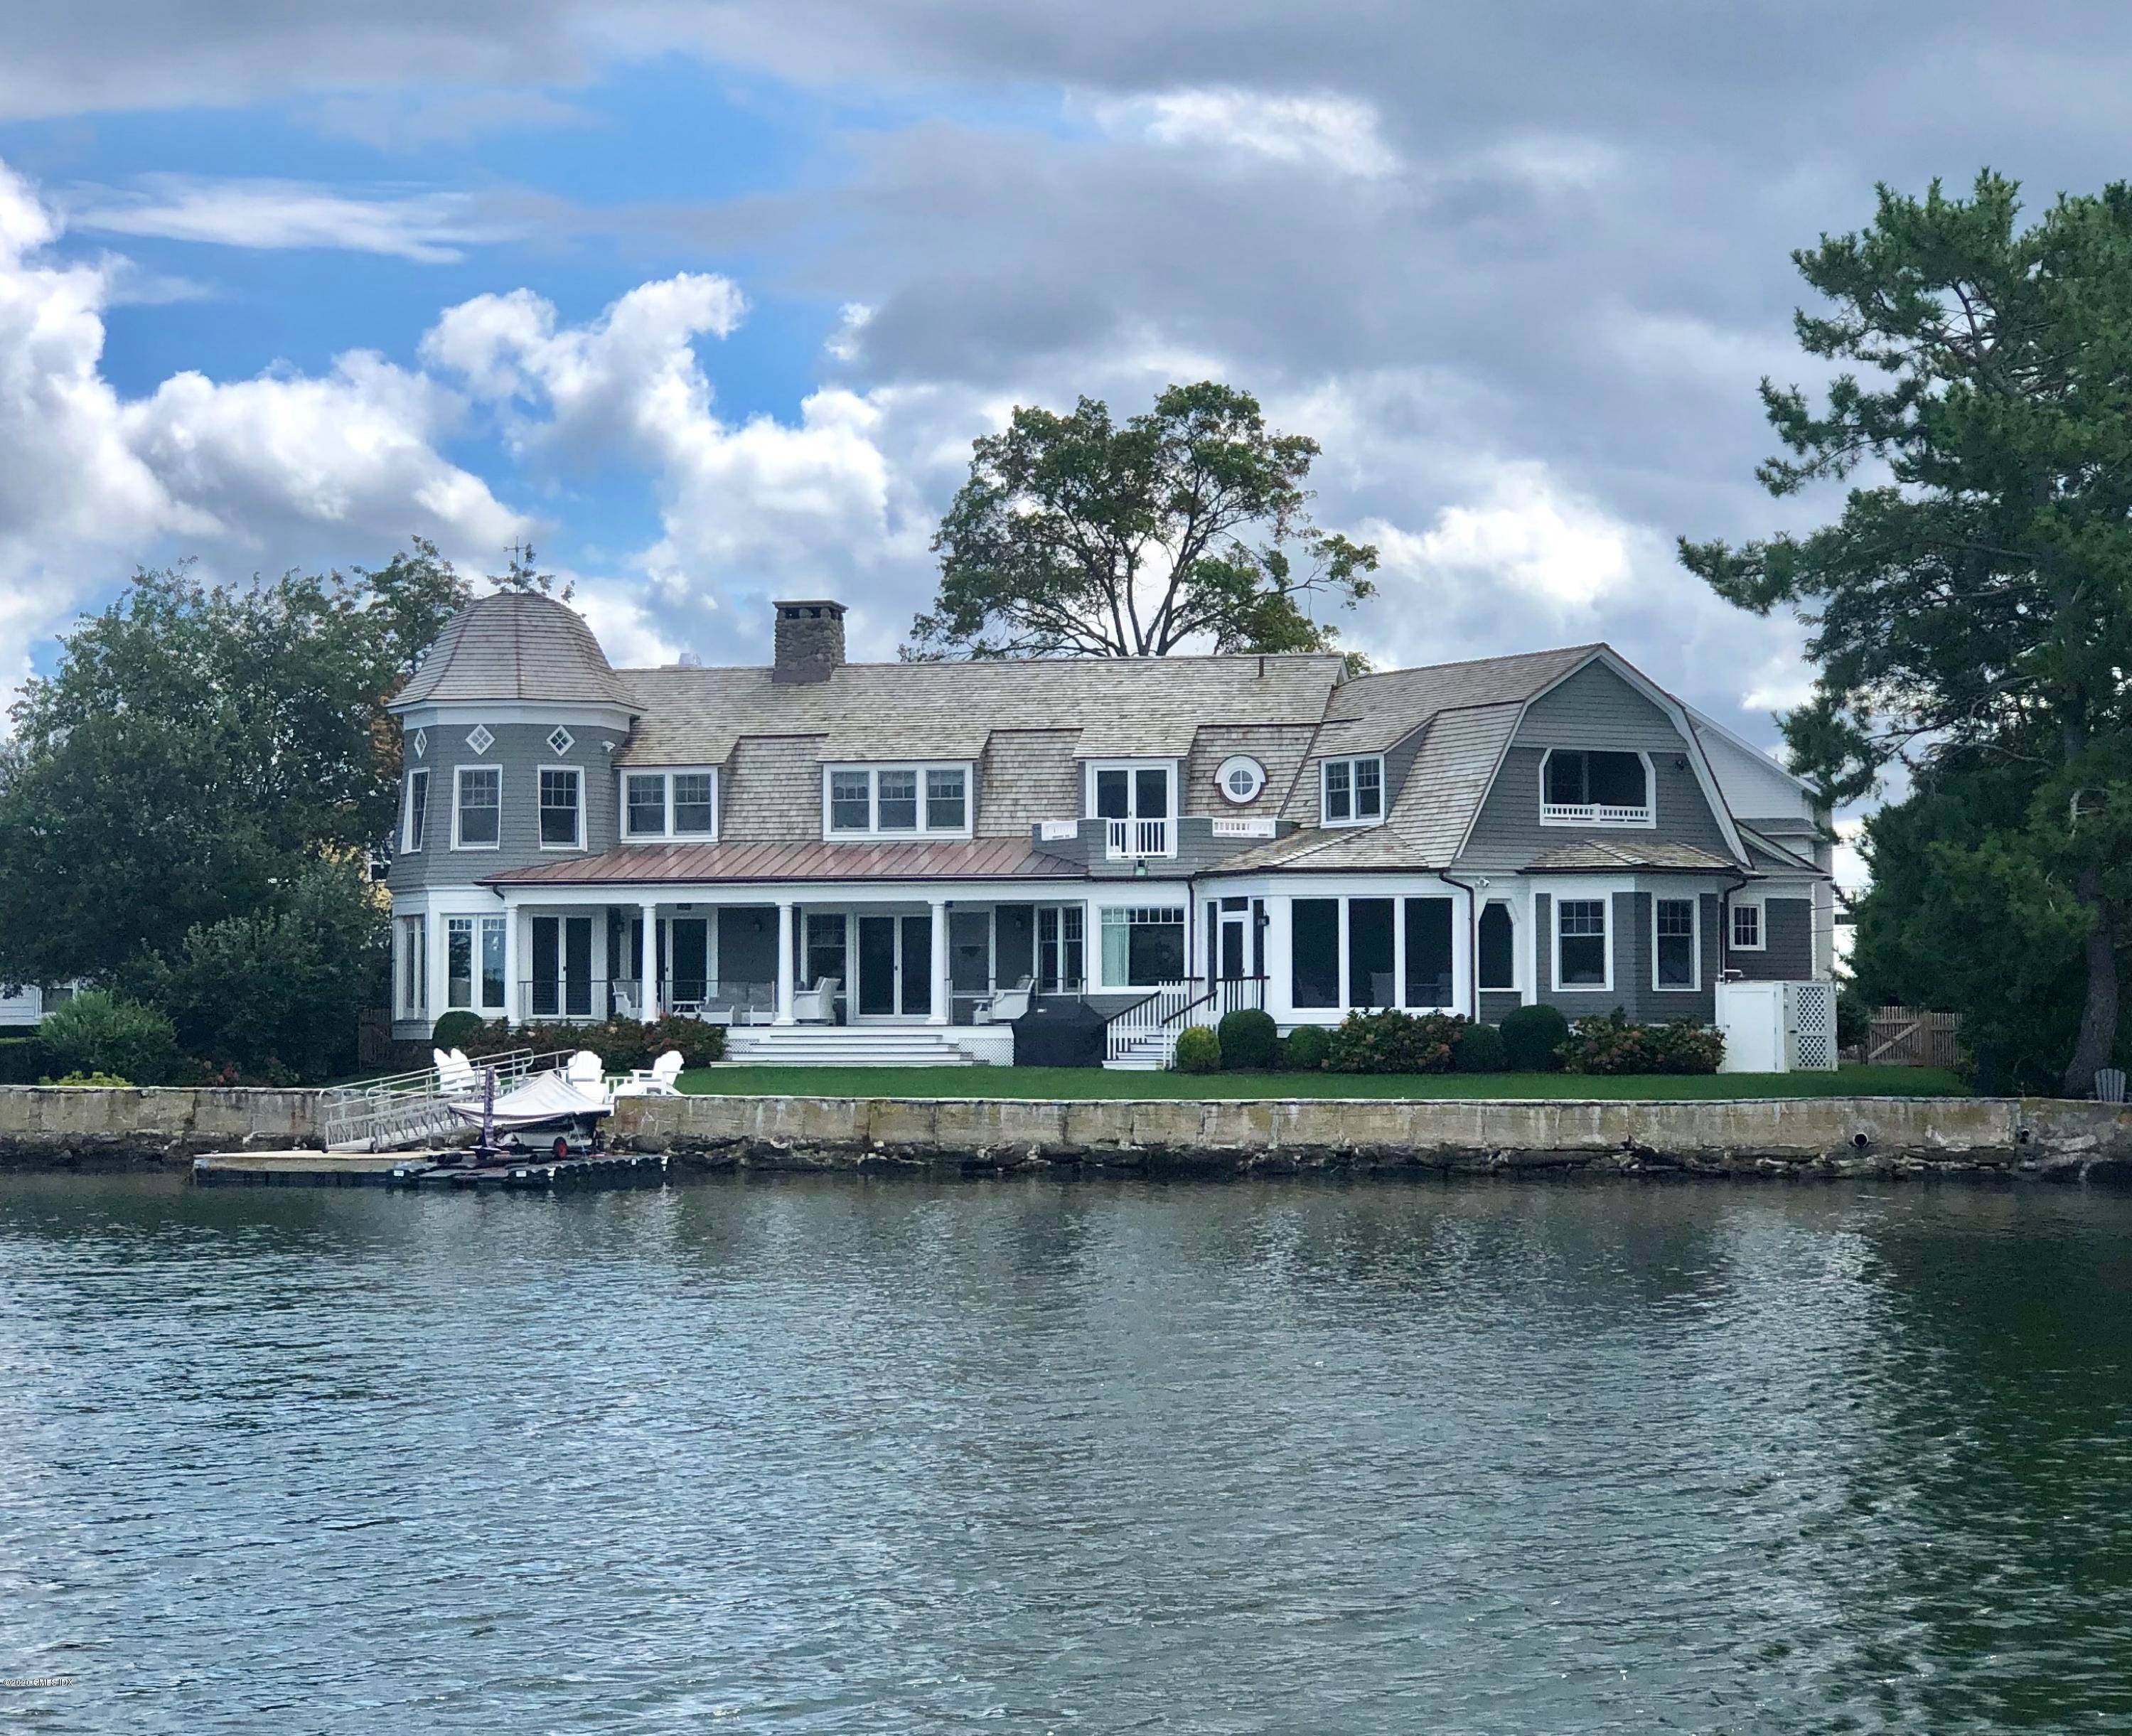 Lucas Point beautifully waterfront home renovated inside and out to the highest standard.